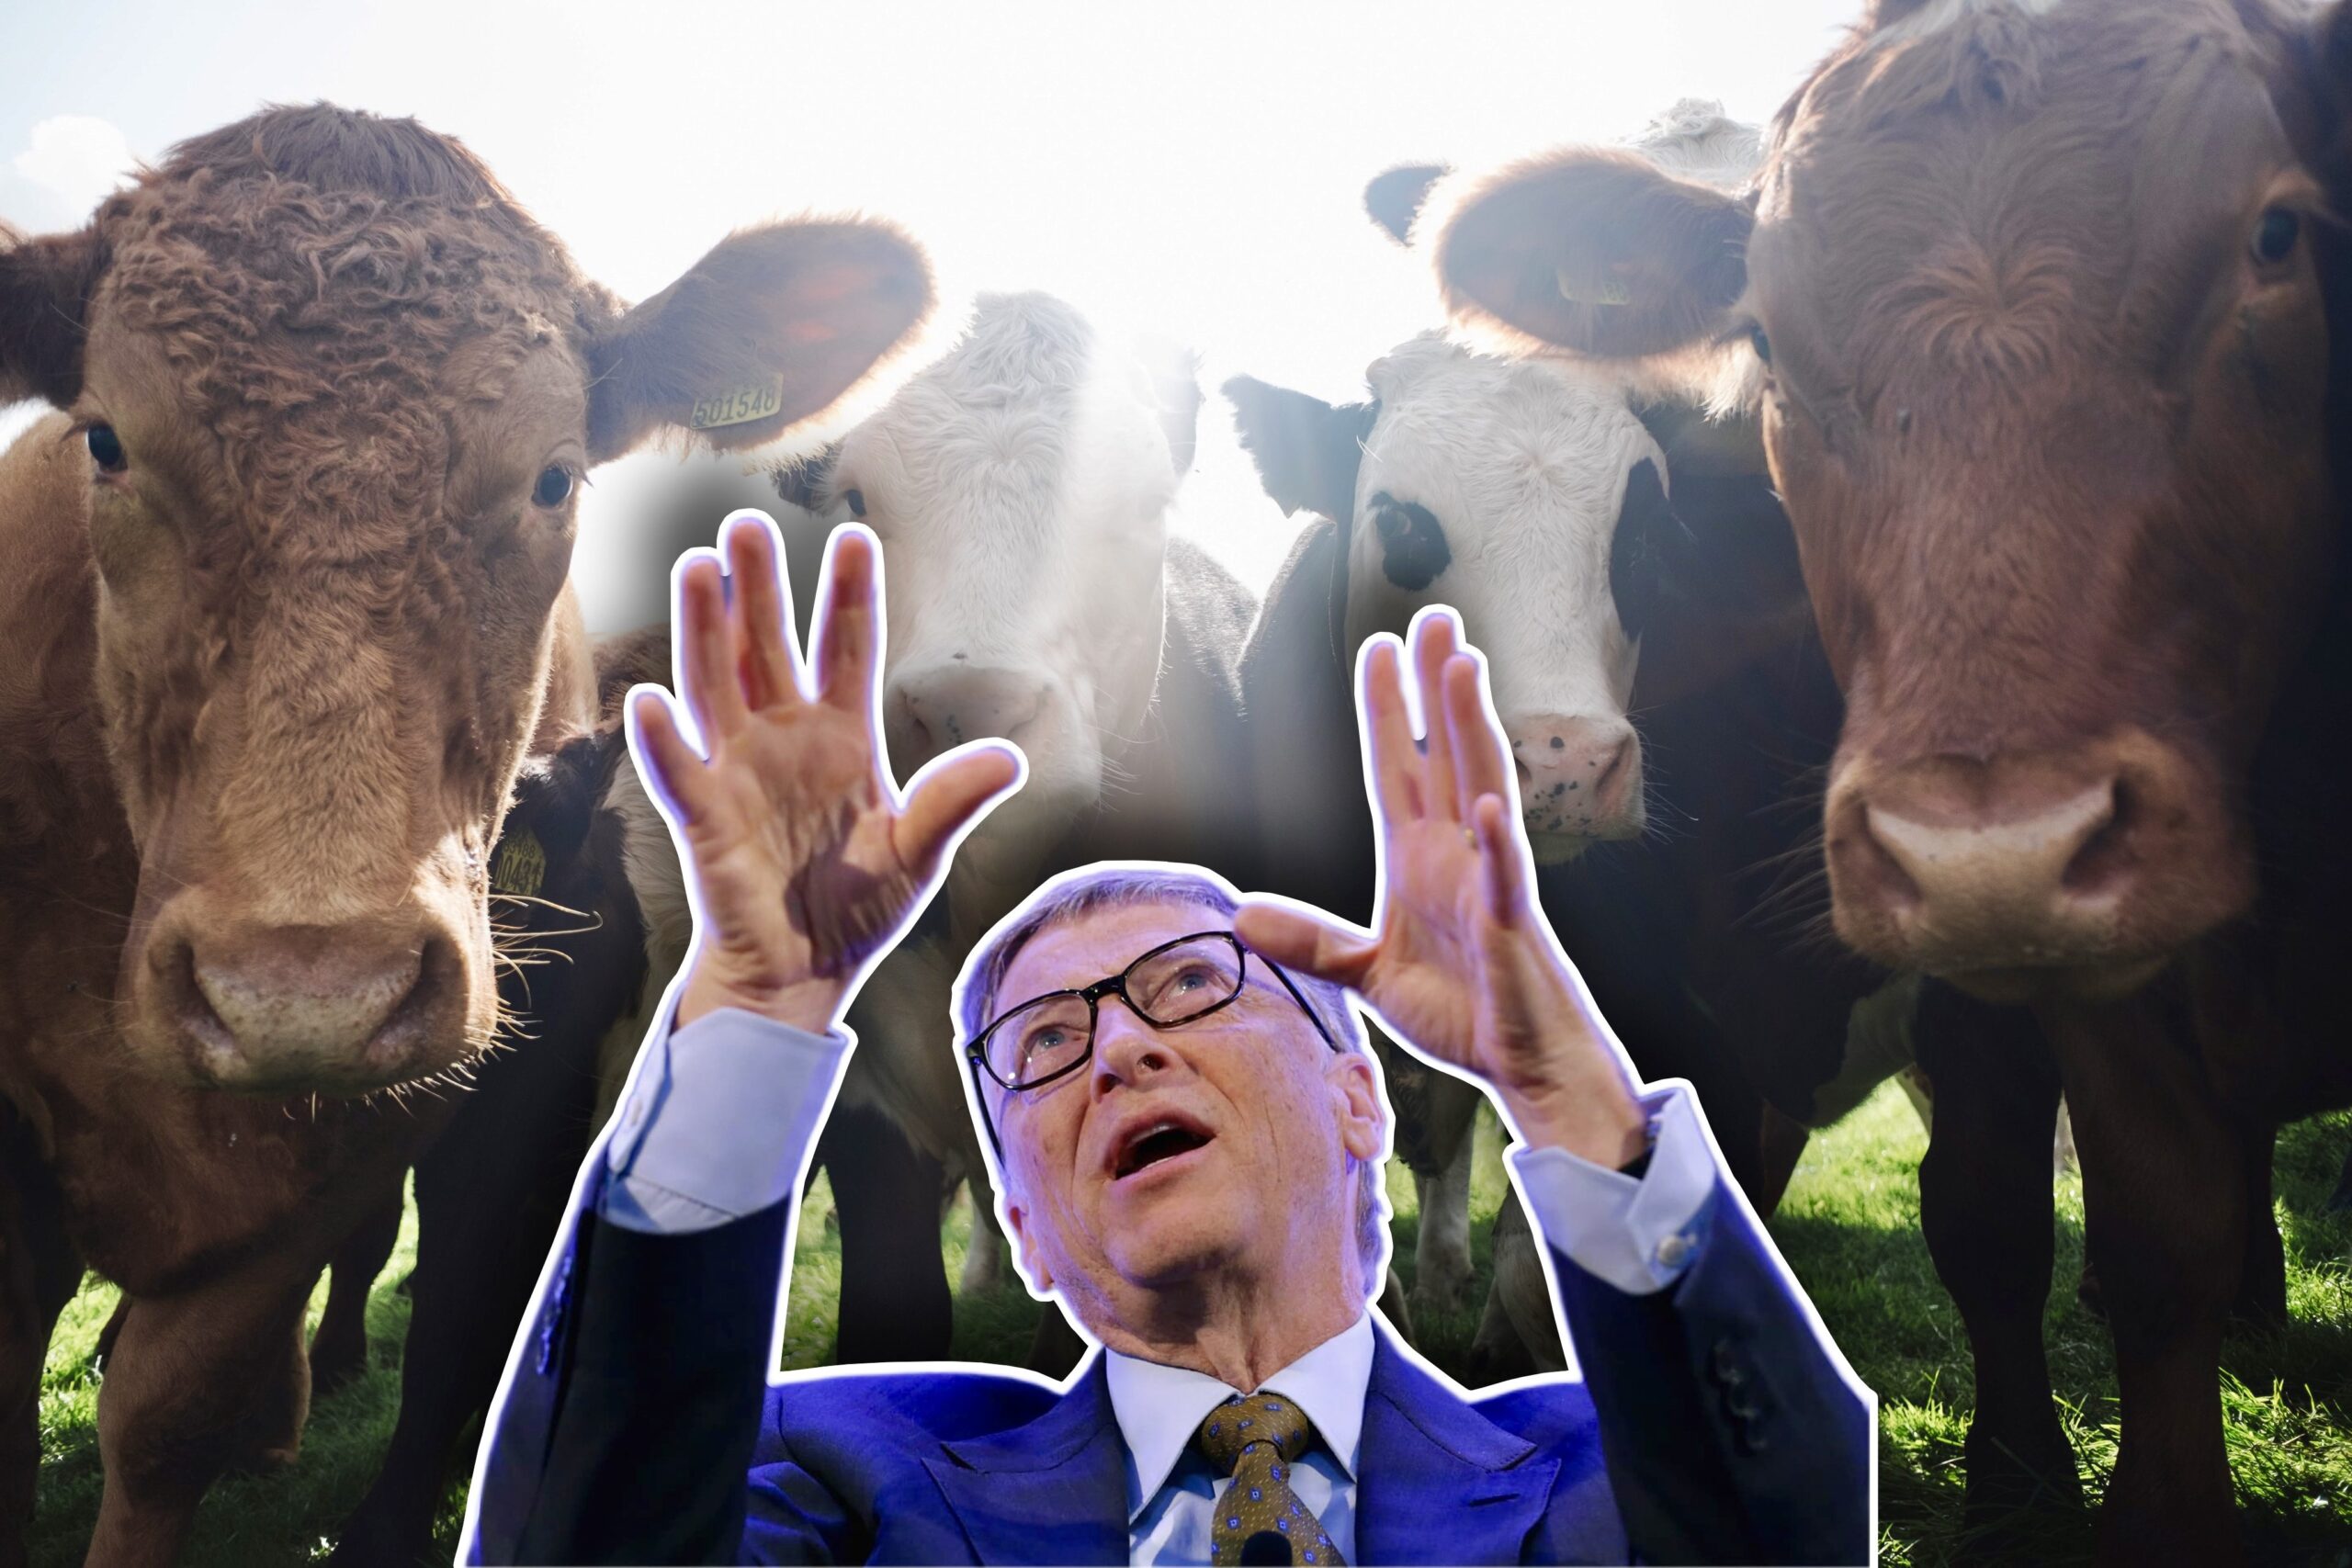 Bill Gates wants a vaccine to stop cow farts and save the planet from so-called climate change |  The Gateway expert